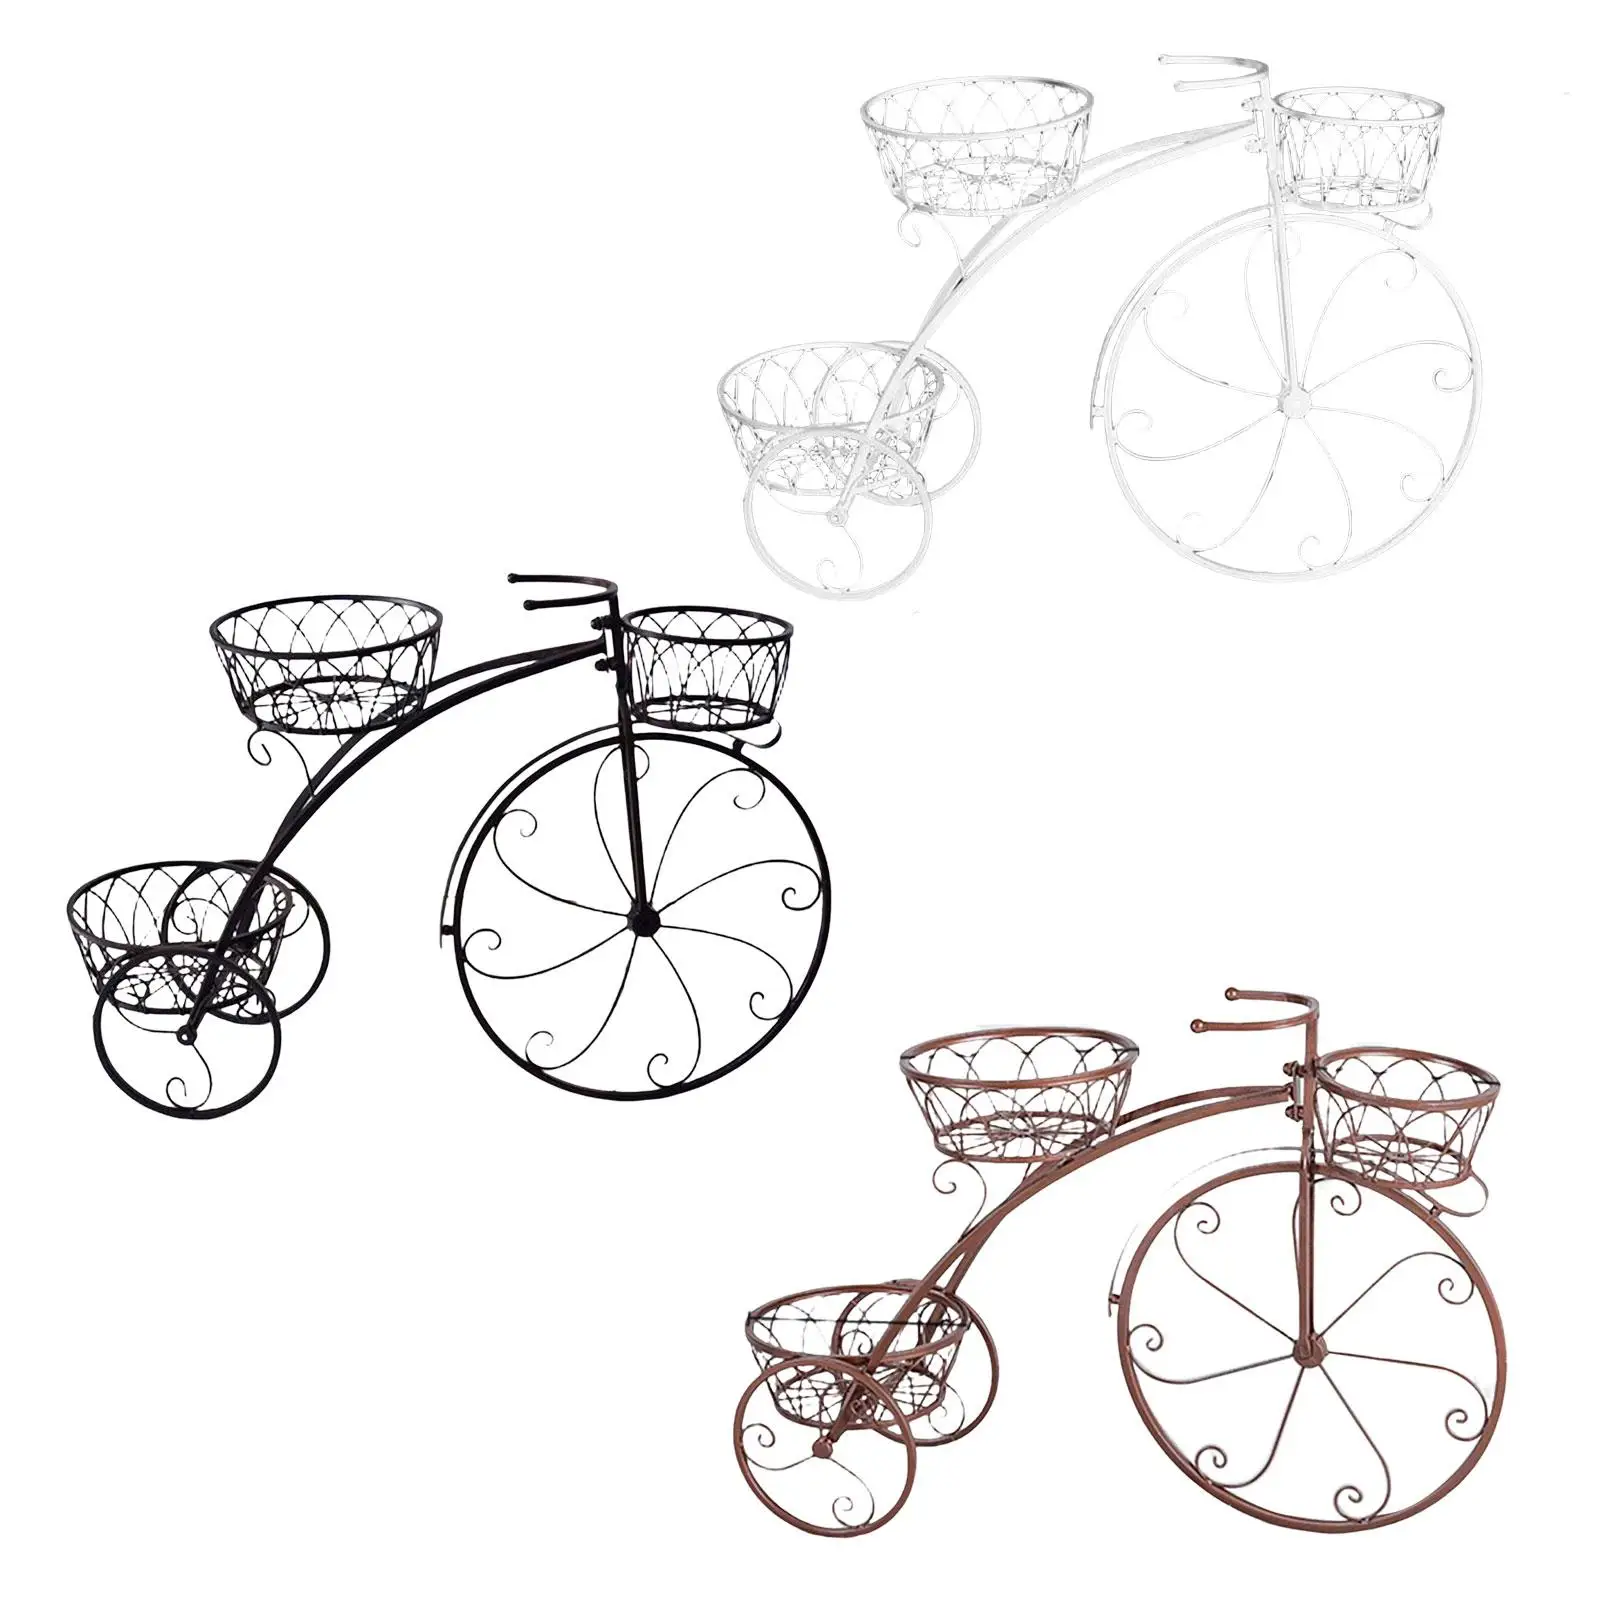 Bicycle Flower Rack Multipurpose Metal Decorative Storage Shelf Display Rack Bicycle Plant Stand for garden Room Fence